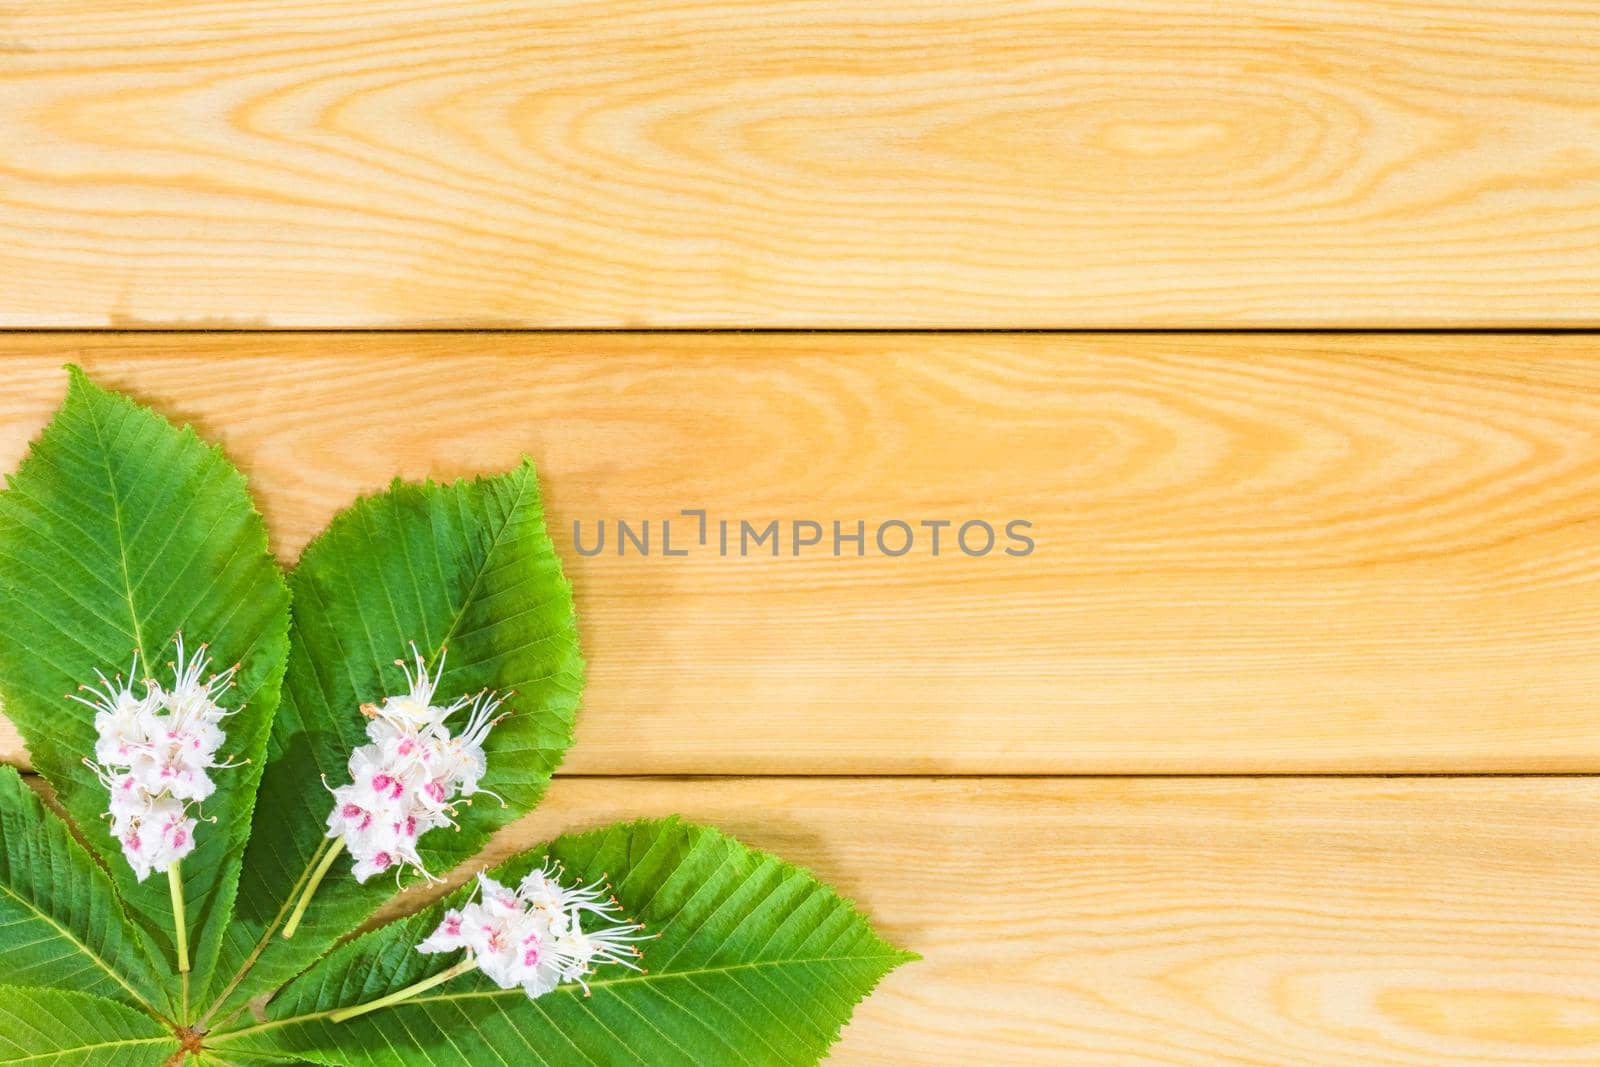 chestnut leaves on a wooden background top view by roman112007